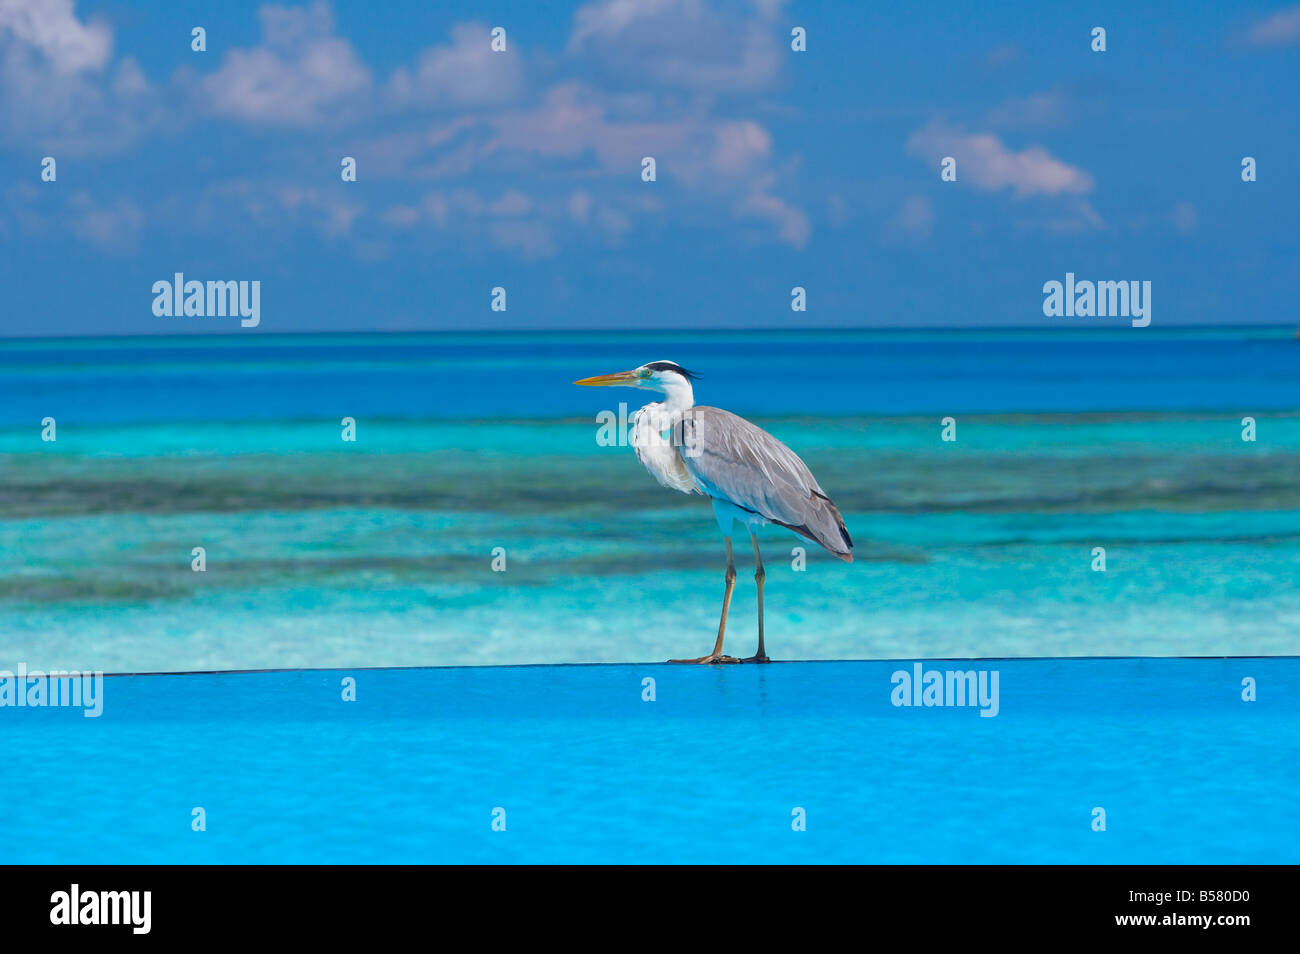 Blue heron standing in water, Maldives, Indian Ocean, Asia Stock Photo